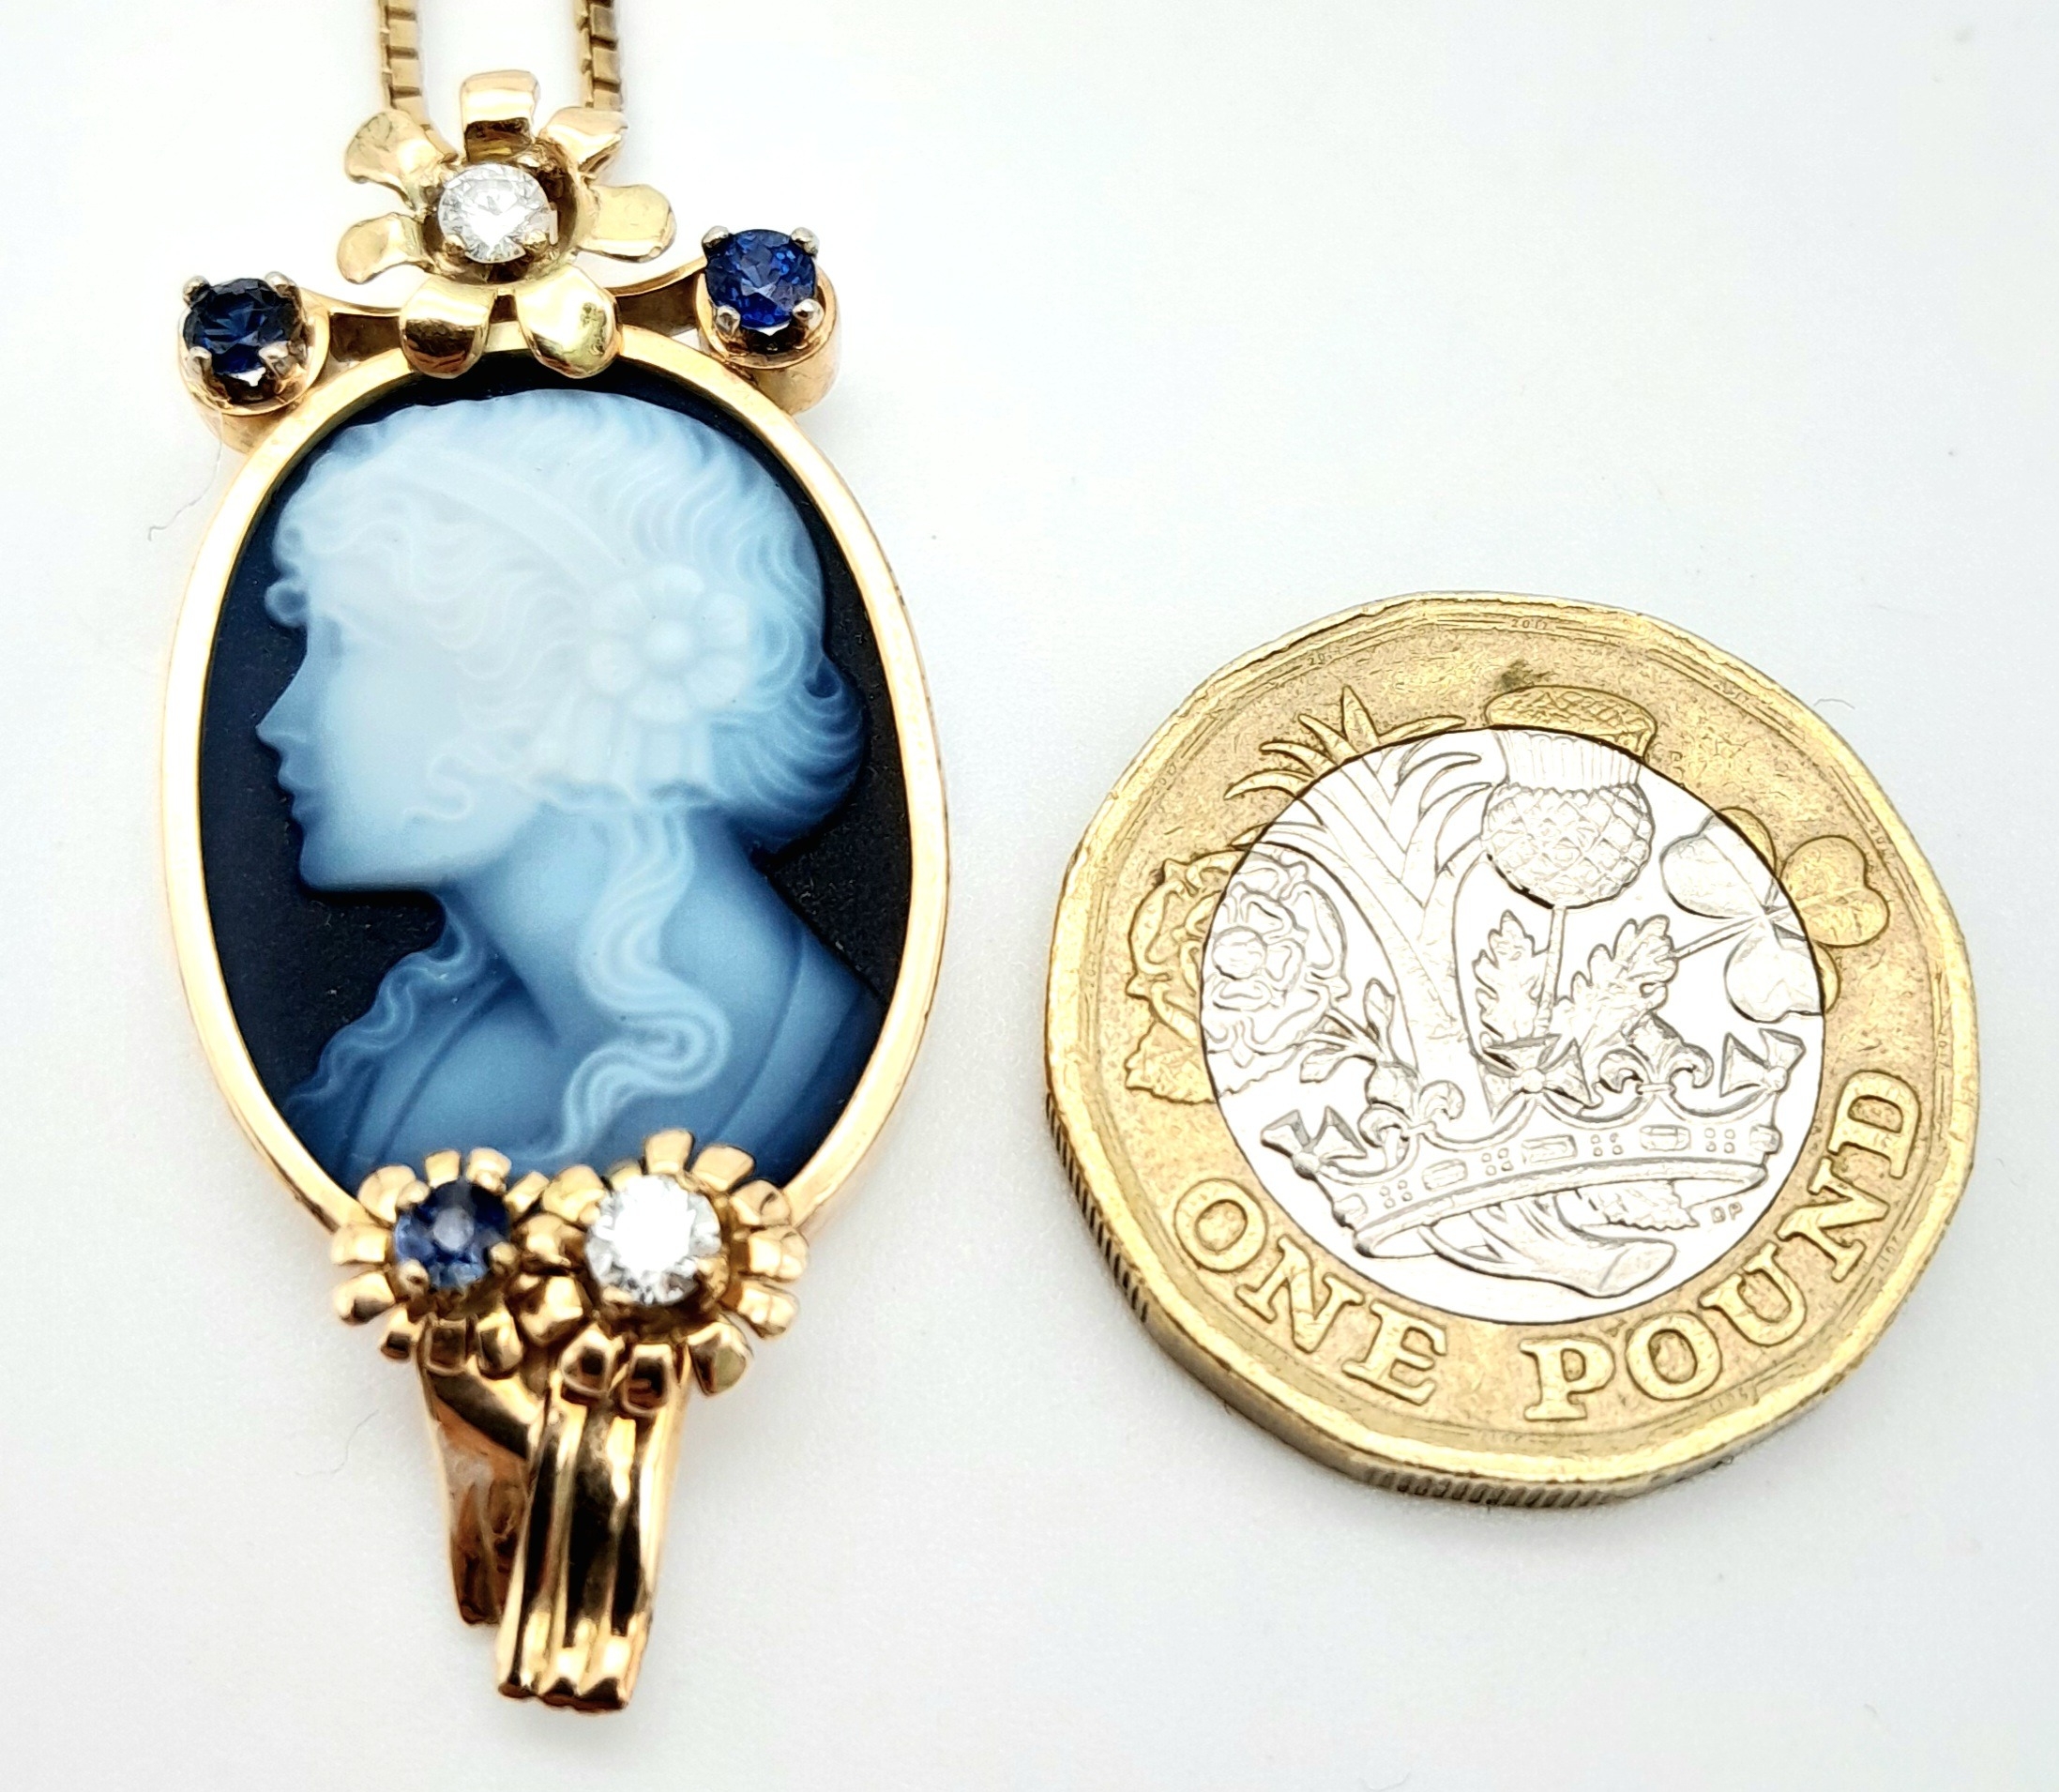 A Beautiful 9K Gold, Cameo Pendant with Sapphire and Diamond decoration on a 9K link chain. - Image 5 of 6